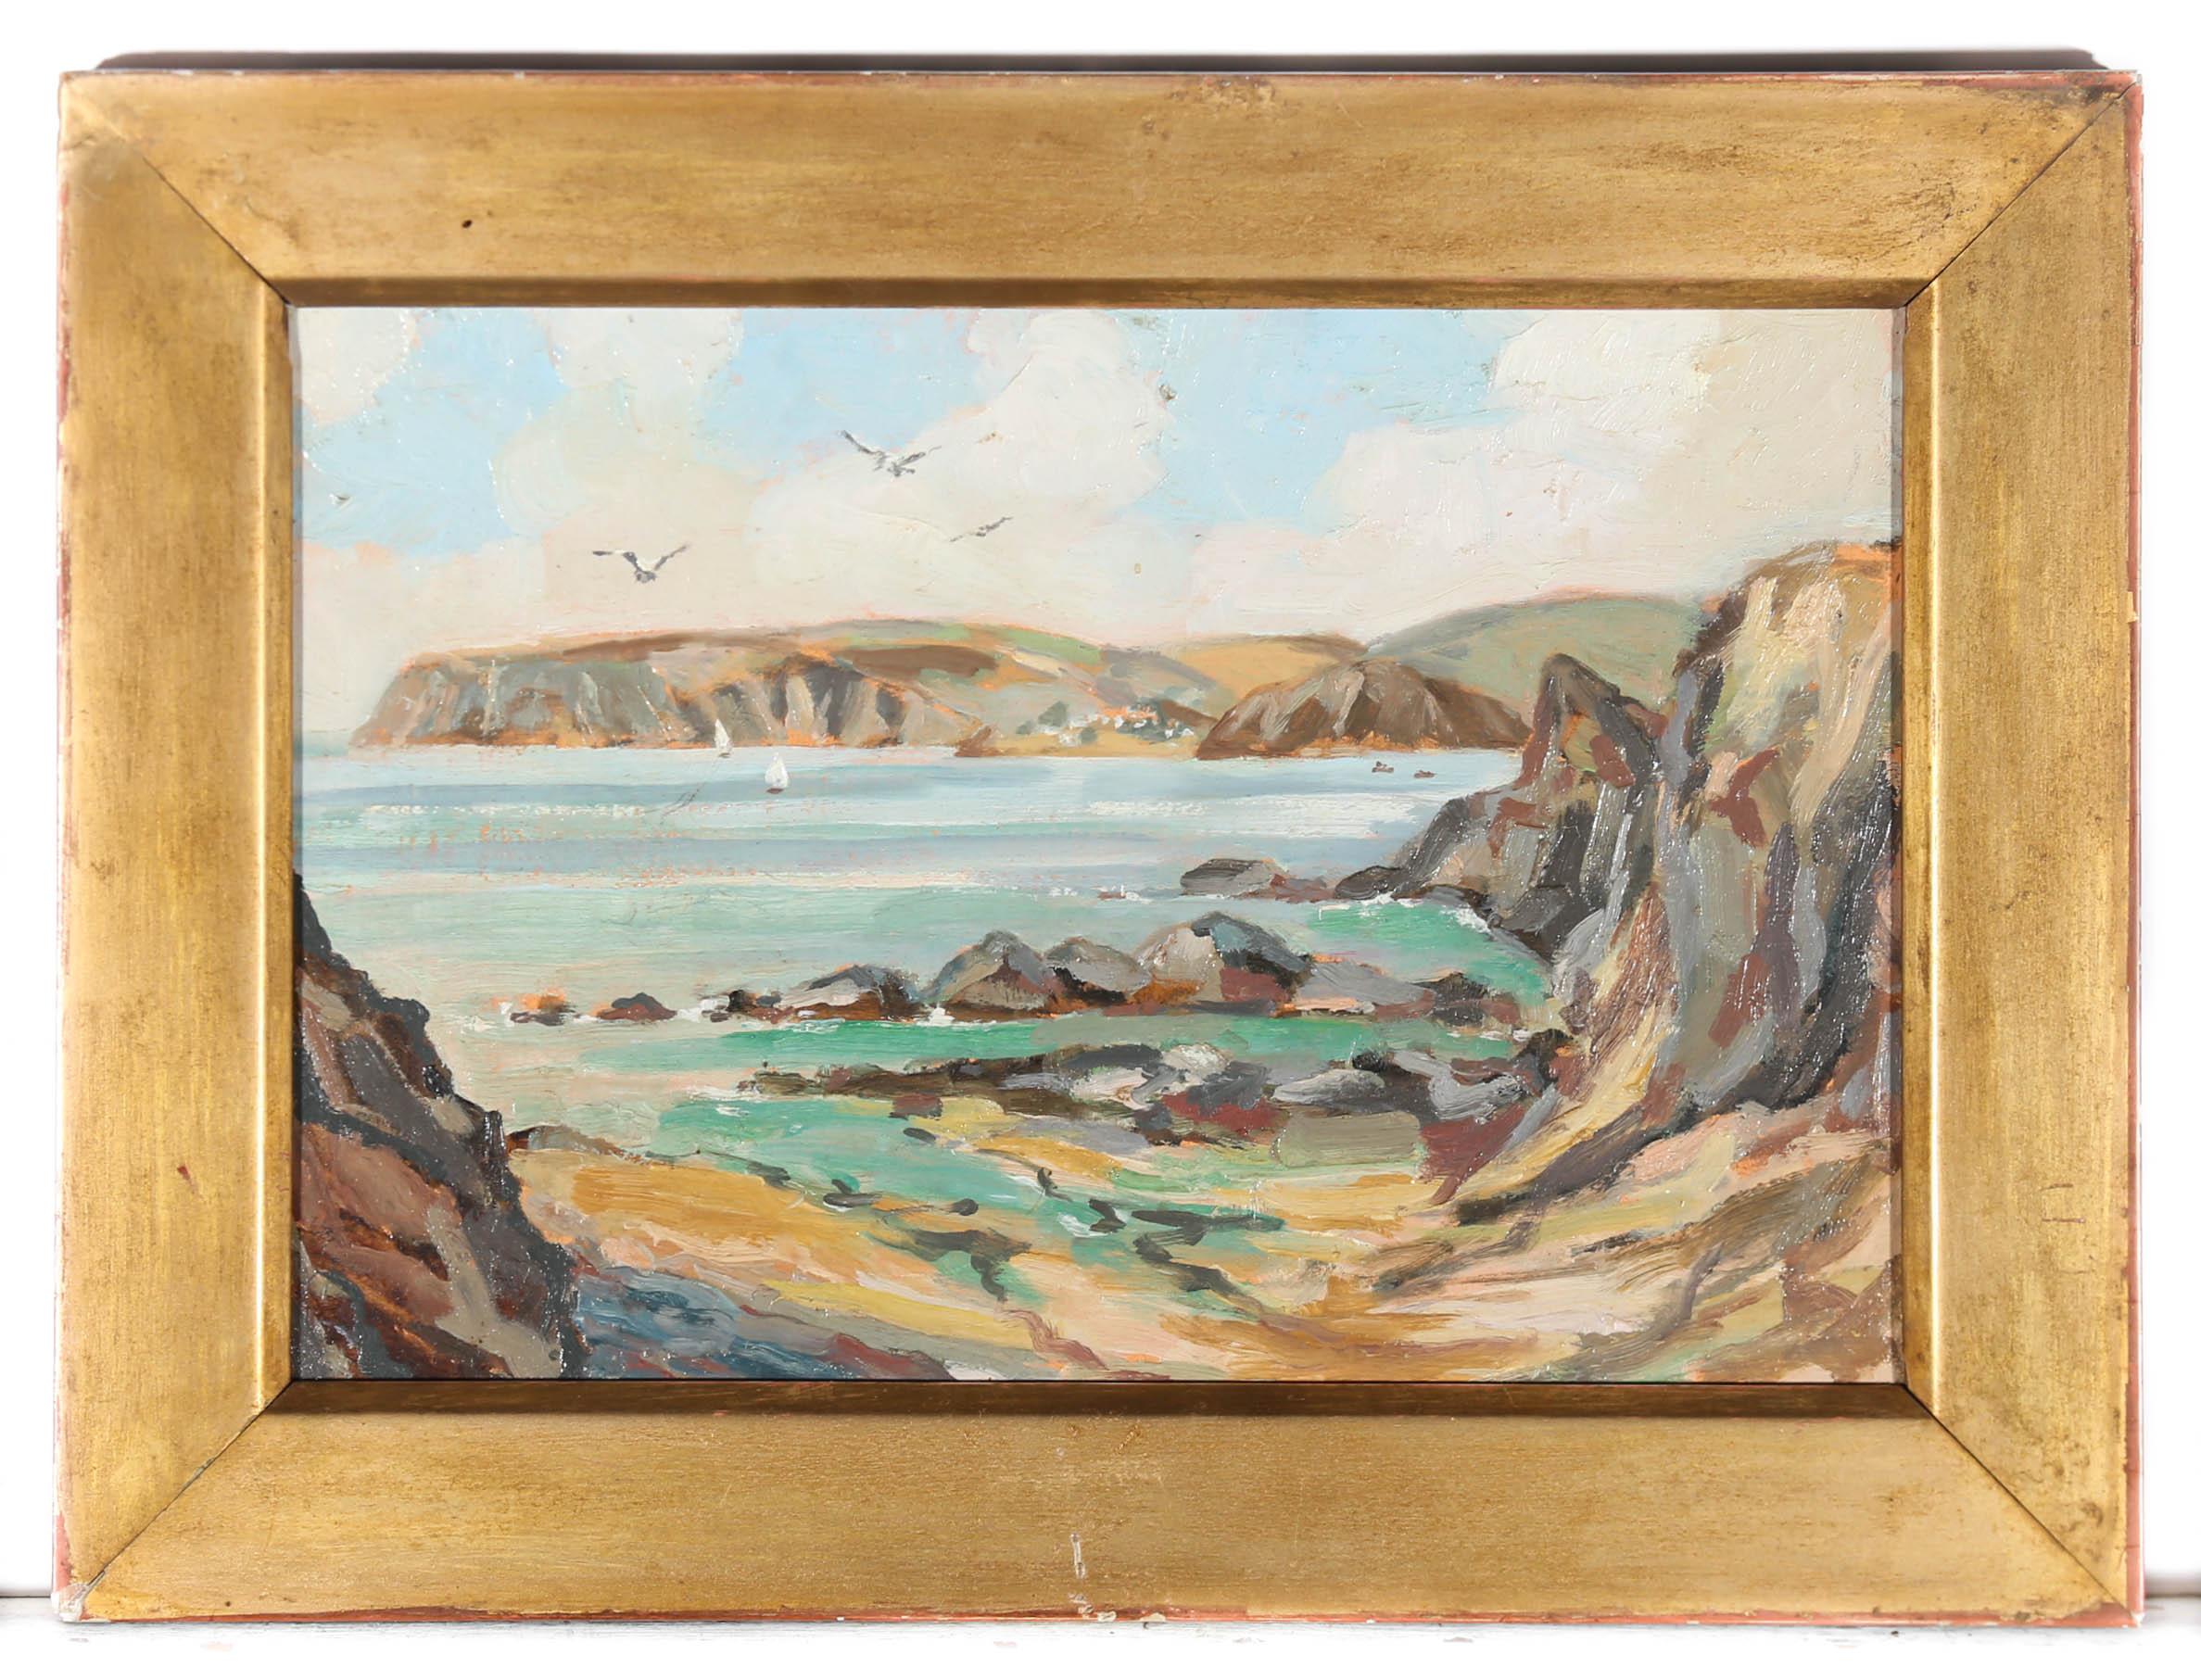 This charming oil depicts a sunny coastal view from Outer Hope Cove to the sandy bay of Bigbury-on-Sea. The artist has caught the tonal qualities of the landscape in an energetic an expressive light, with shaded rocks partially submerged in shallow